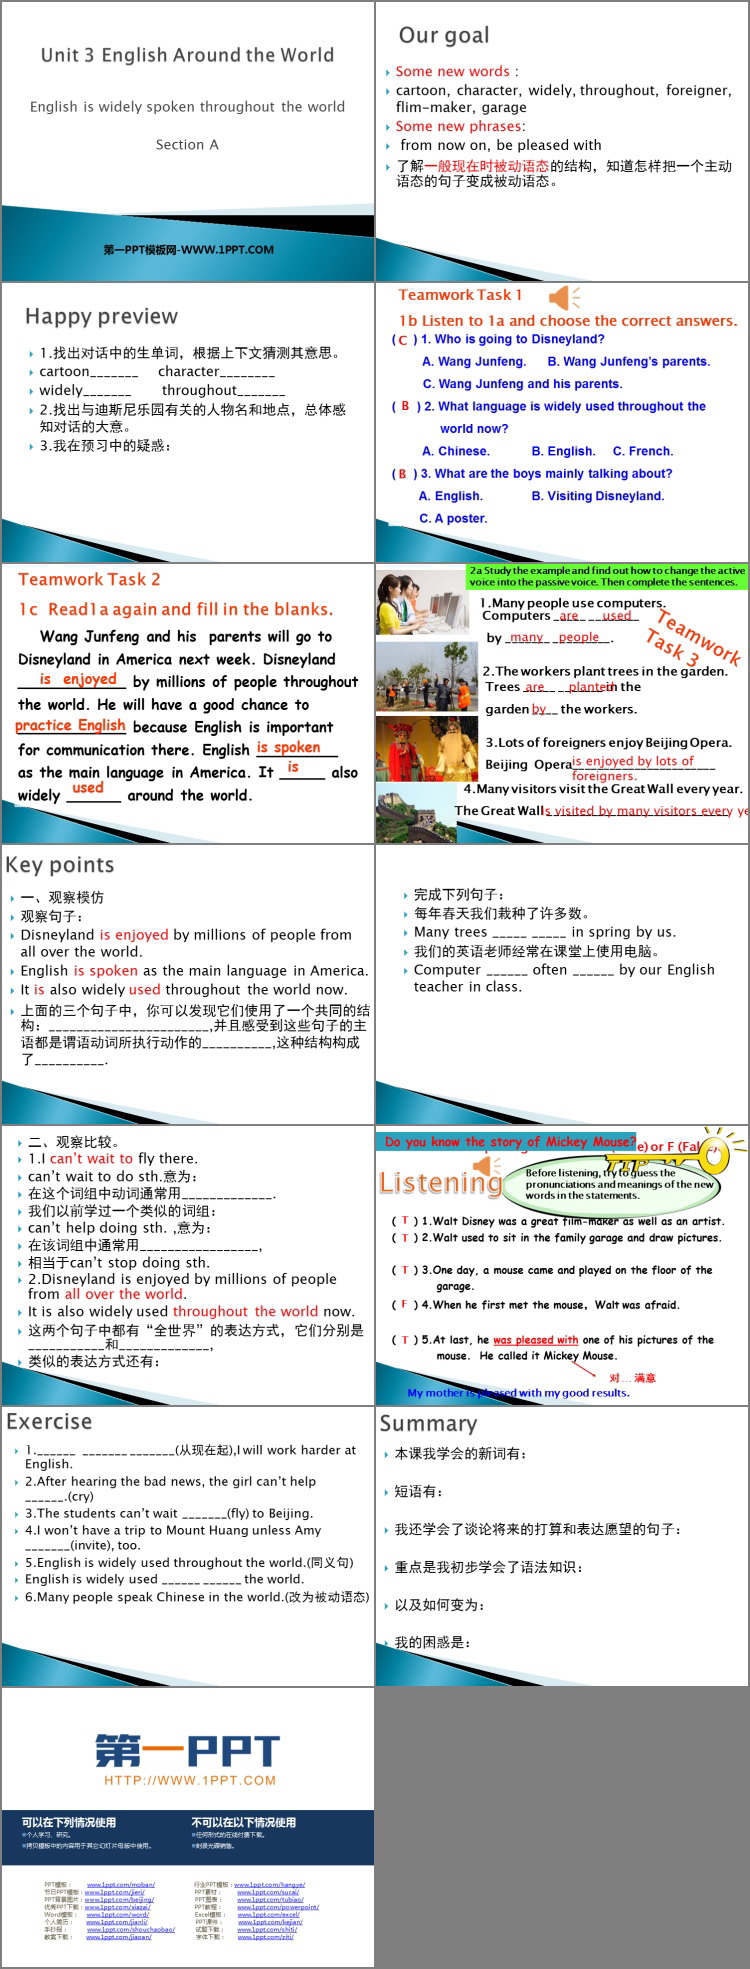 《English is widely spoken throughout the world》SectionC MP3音频课件-预览图02